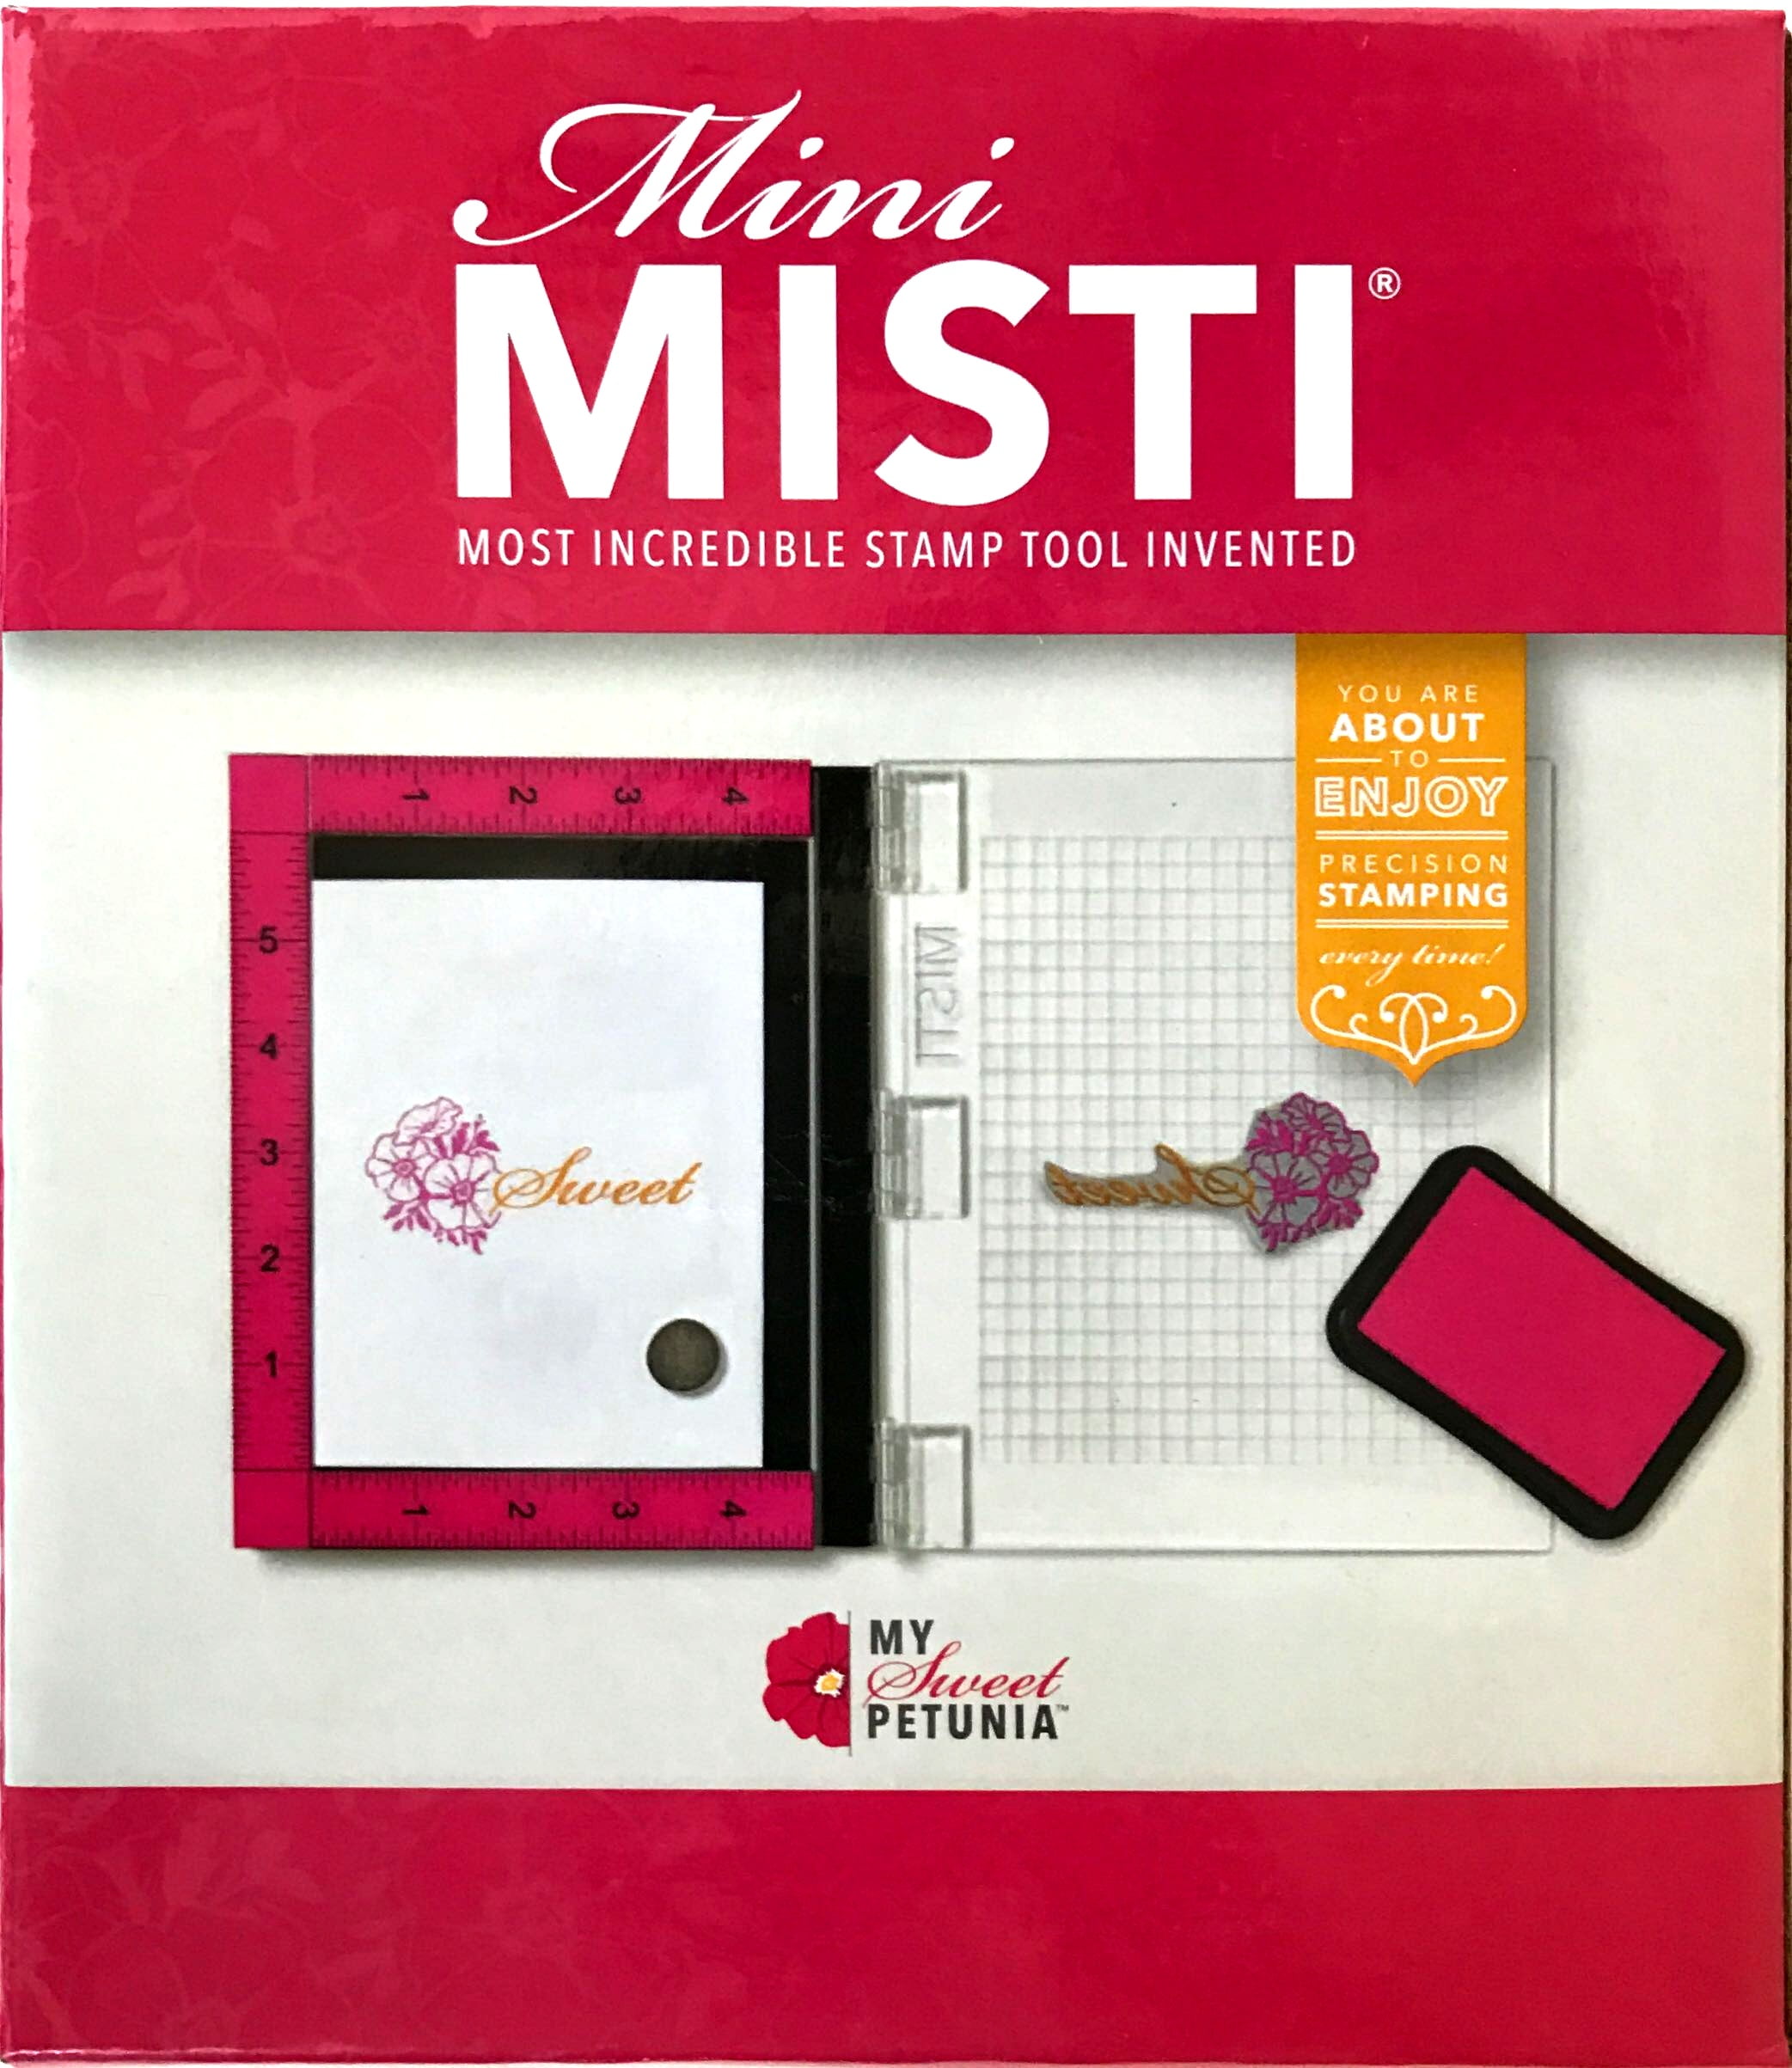 Misti Stamping Tool Original Mouse Pad Plastic Wipe Off Grid White/Pink  Mouse Pad. 